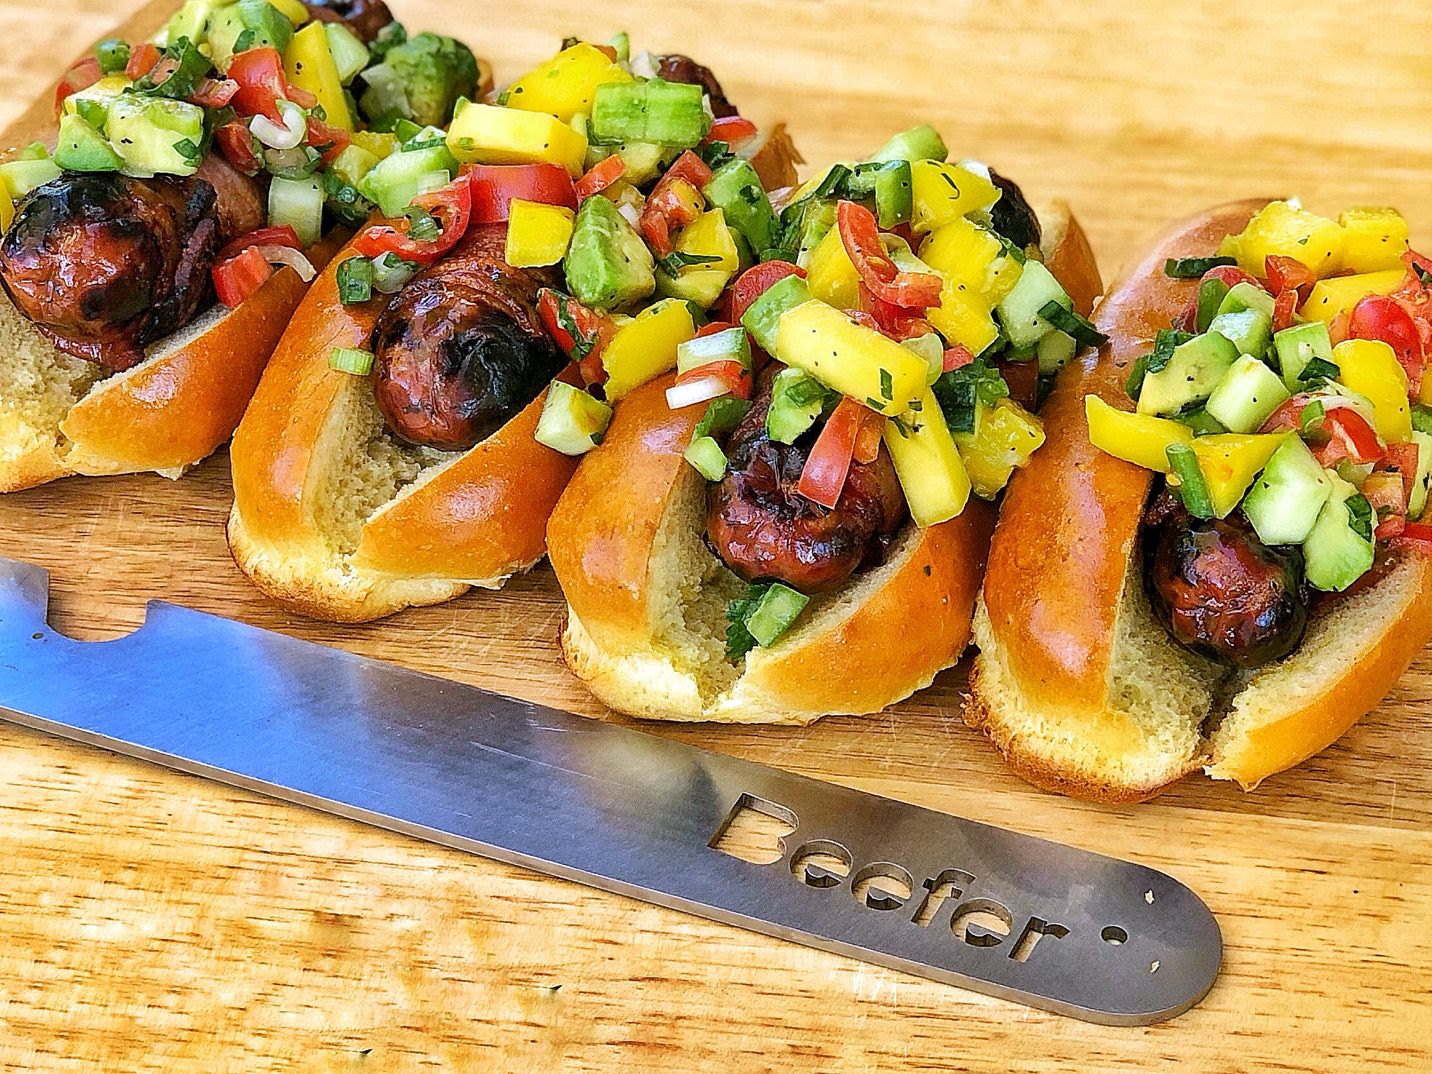 Bacon Wrapped Sausages with Mango, Avocado and Cucumber Salsa from the Beefer